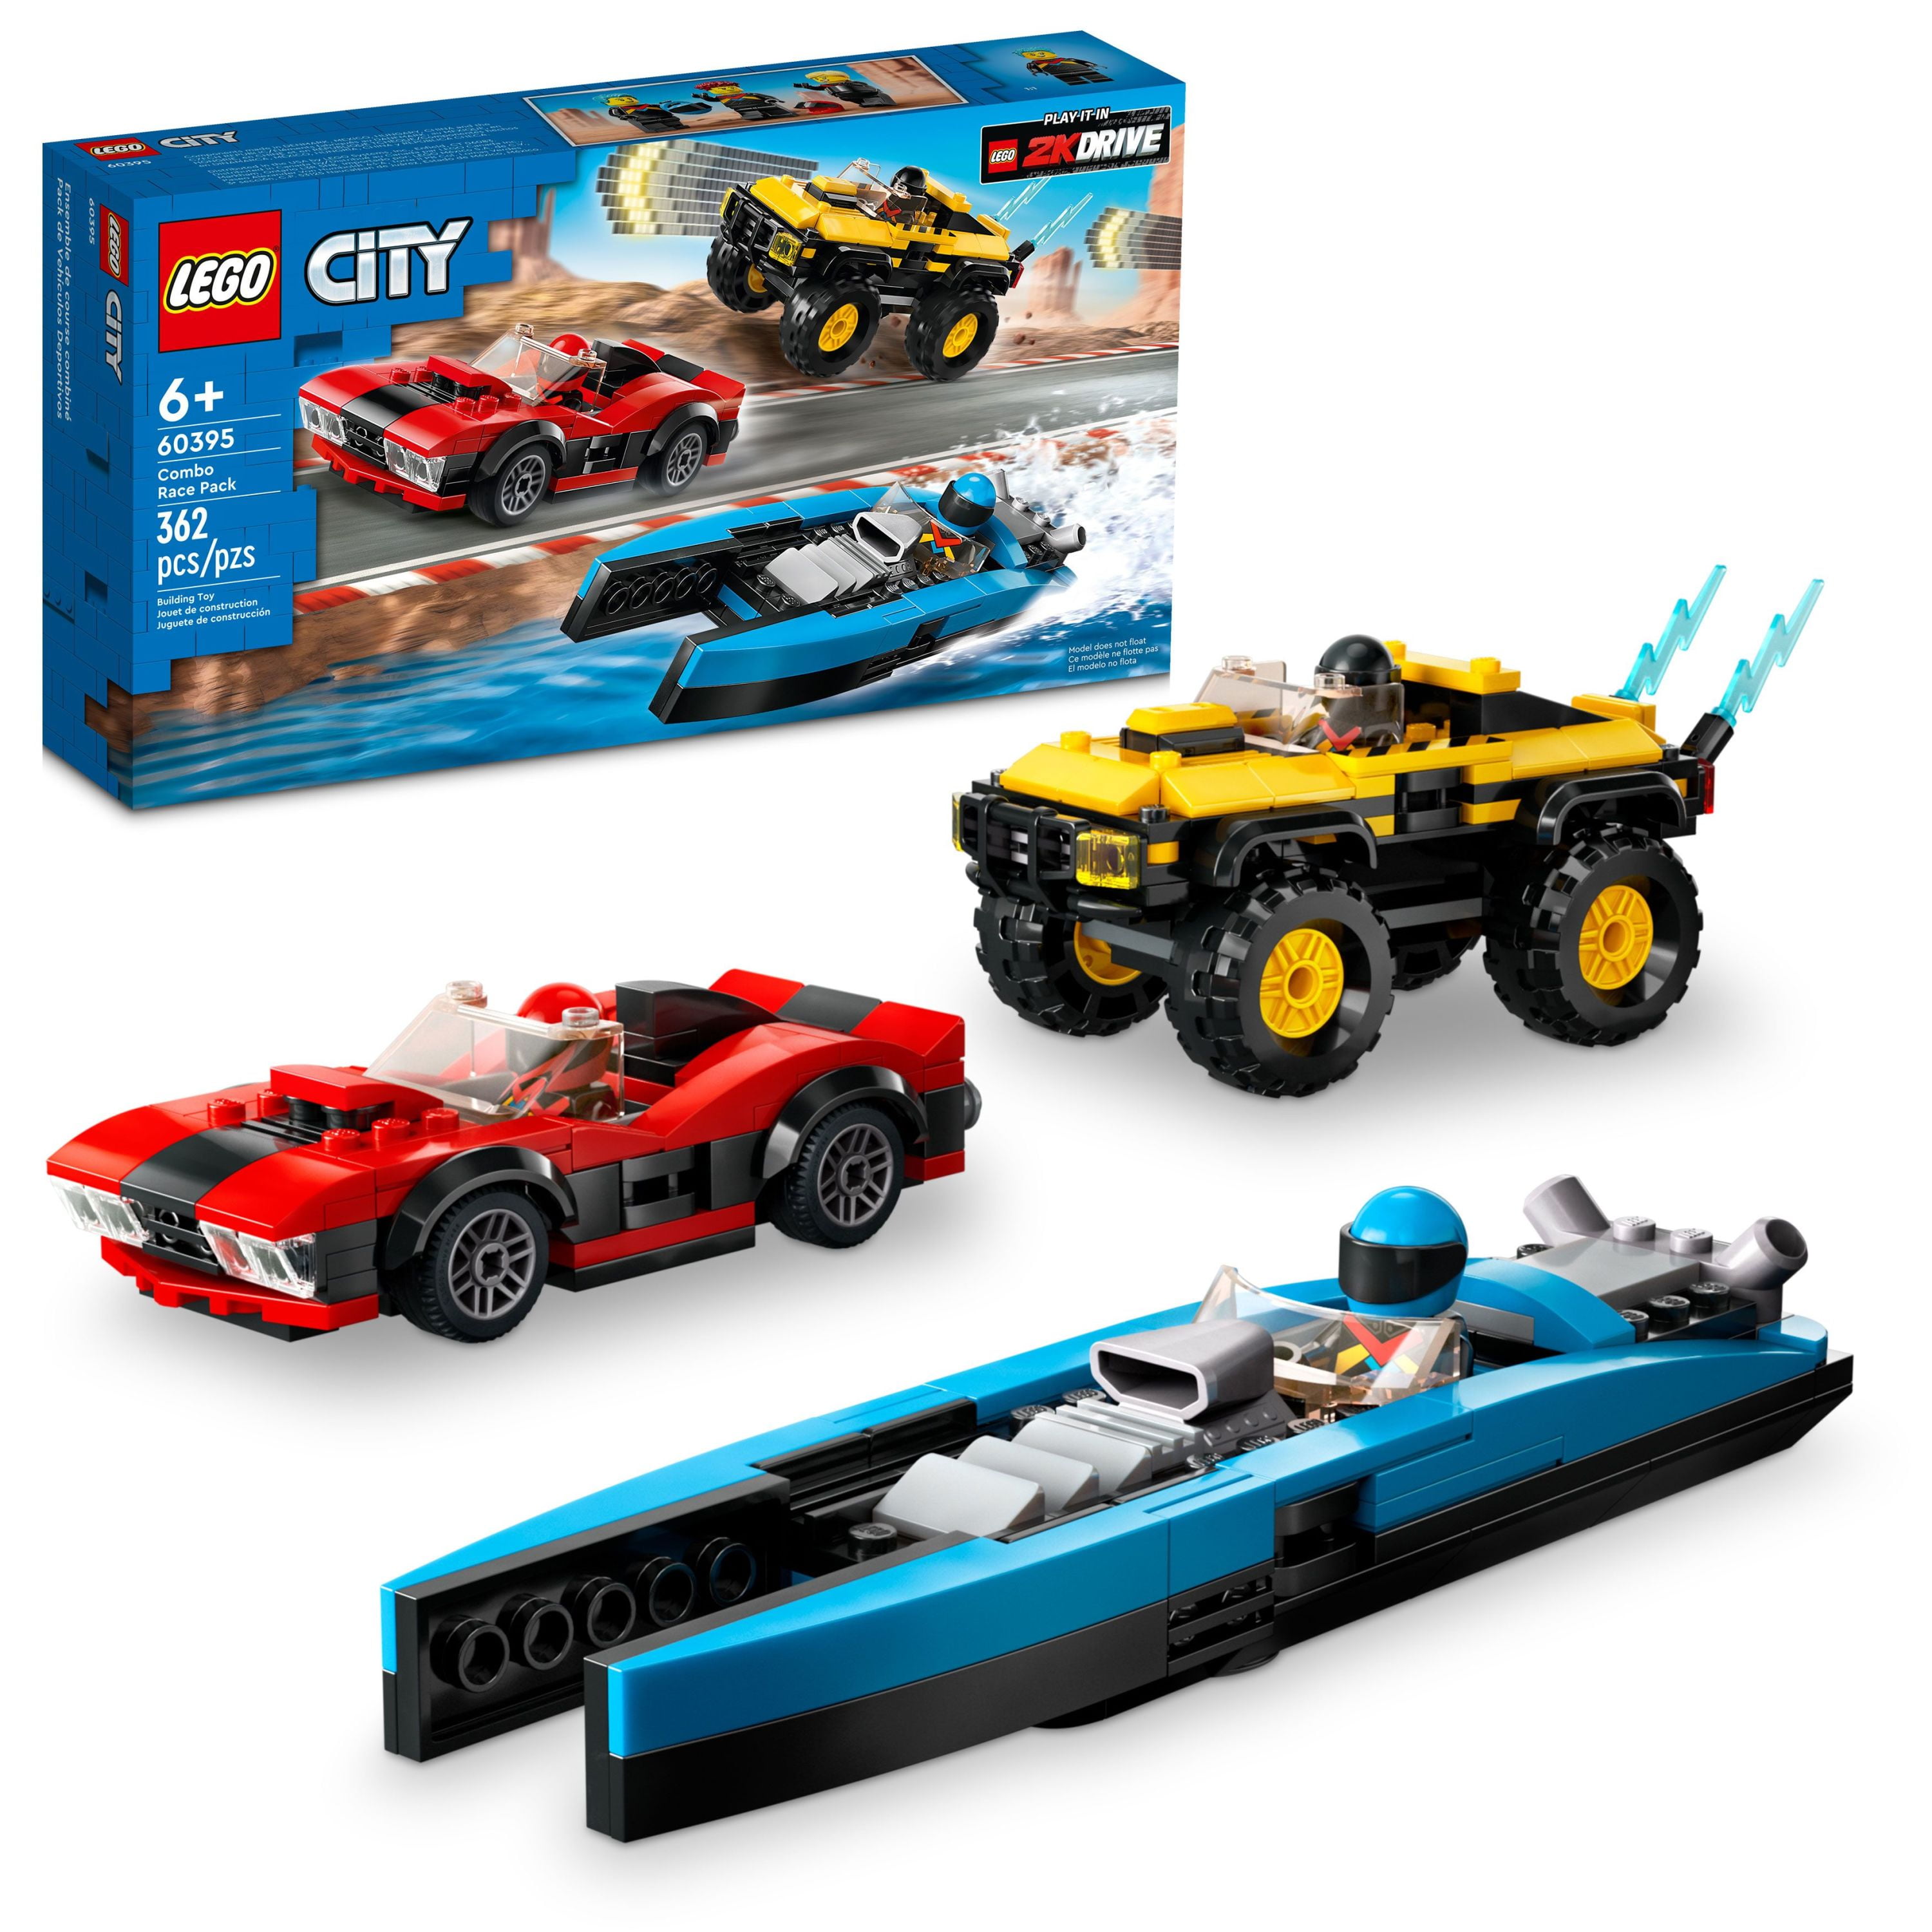 Tilsyneladende Flyve drage Besættelse LEGO City Combo Race Pack 60395 Toy Car Building Set, Includes a Sports  Car, SUV, Speedboat and 3 Driver Minifigures, Fun Toy for 6 Year Old Boys  and Girls and Fans of